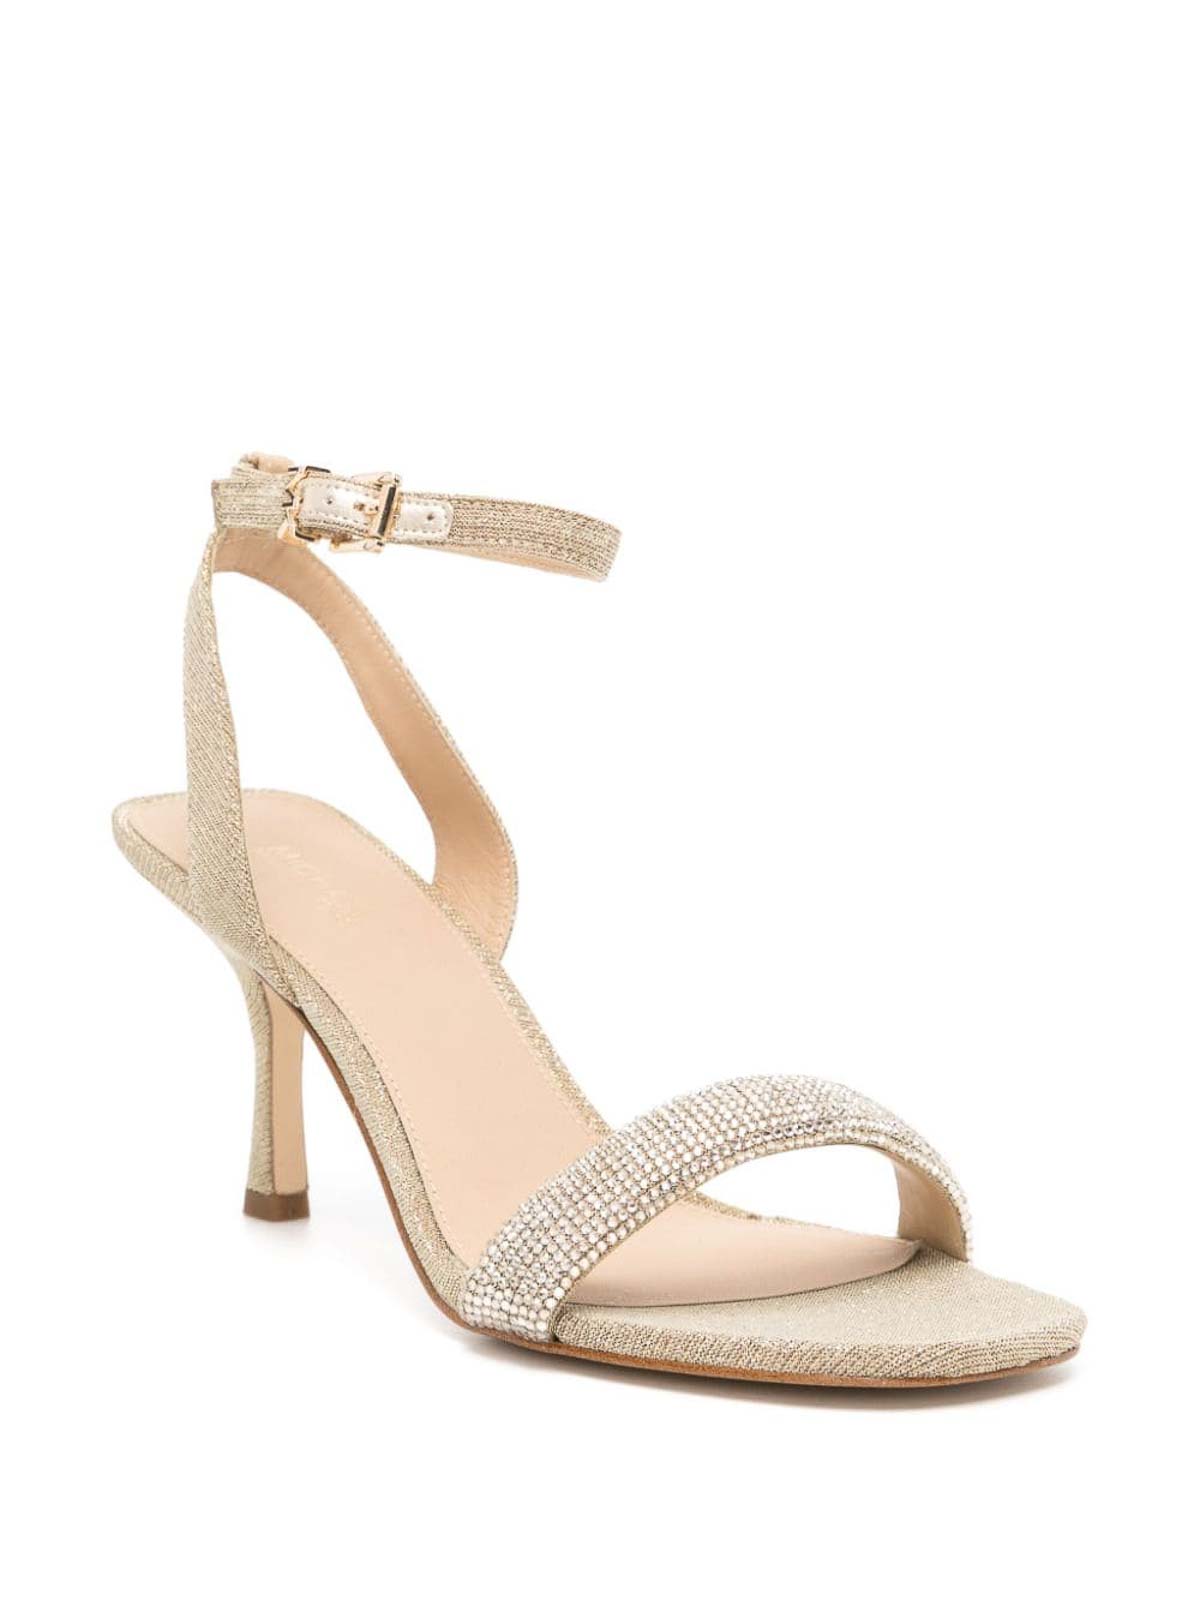 Shop Michael Kors Sandal With Glitter In Silver